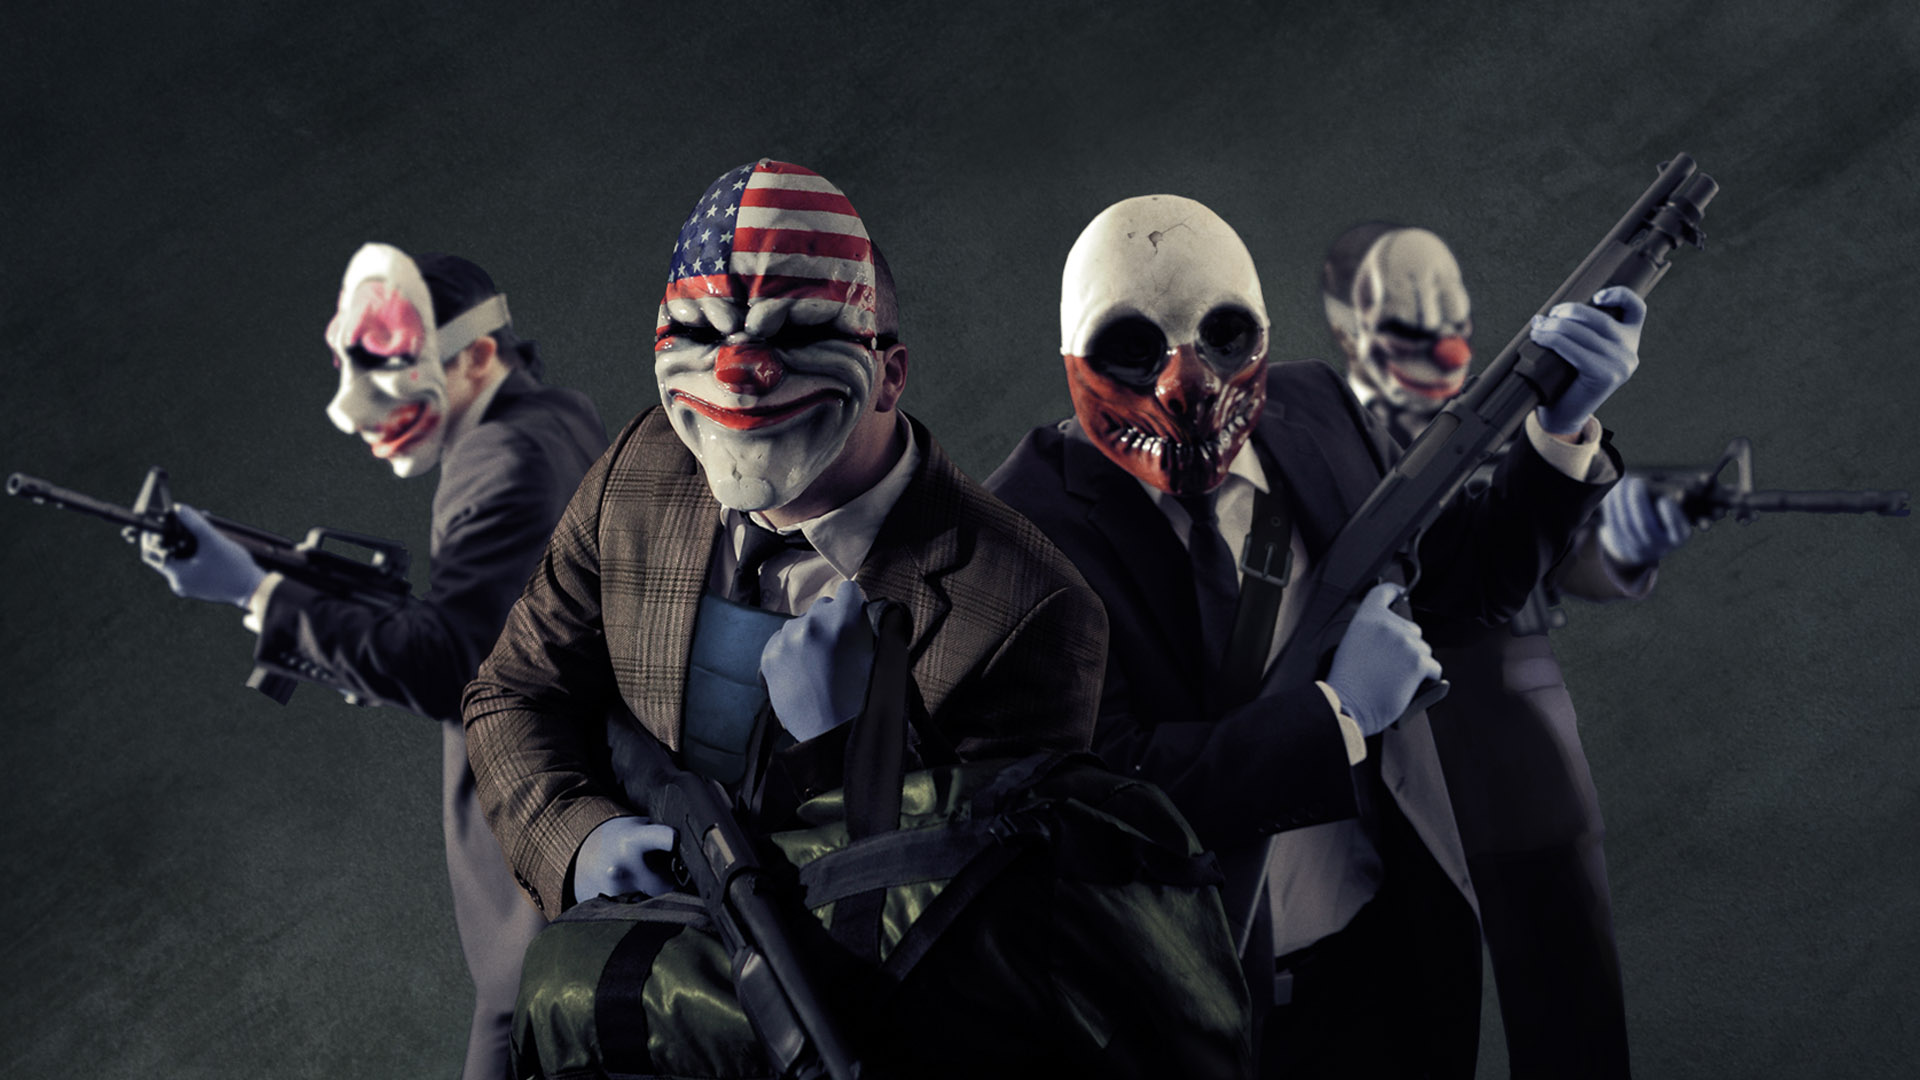 Game Payday 2 Chains Dallas Hoxton Wolf Silk poster wallpaper 24 X 13 inches